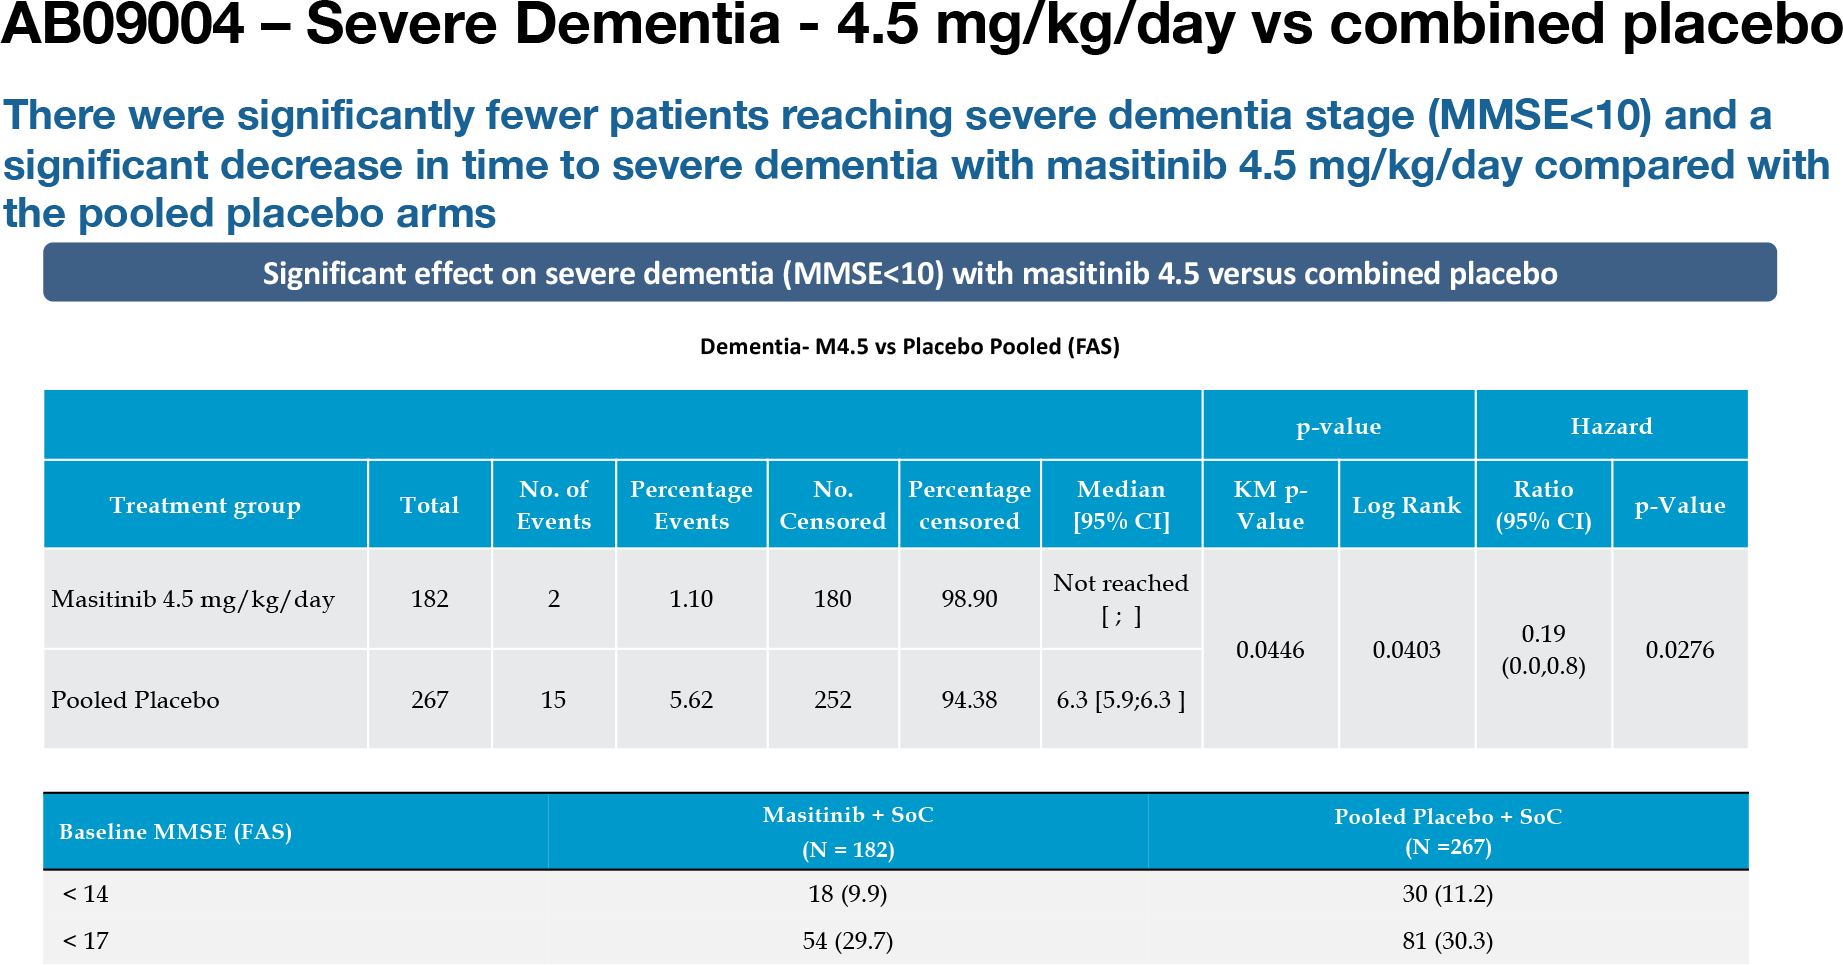 nct01872598 results 07 - Masitinib for Alzheimer’s Disease: It Did Work!